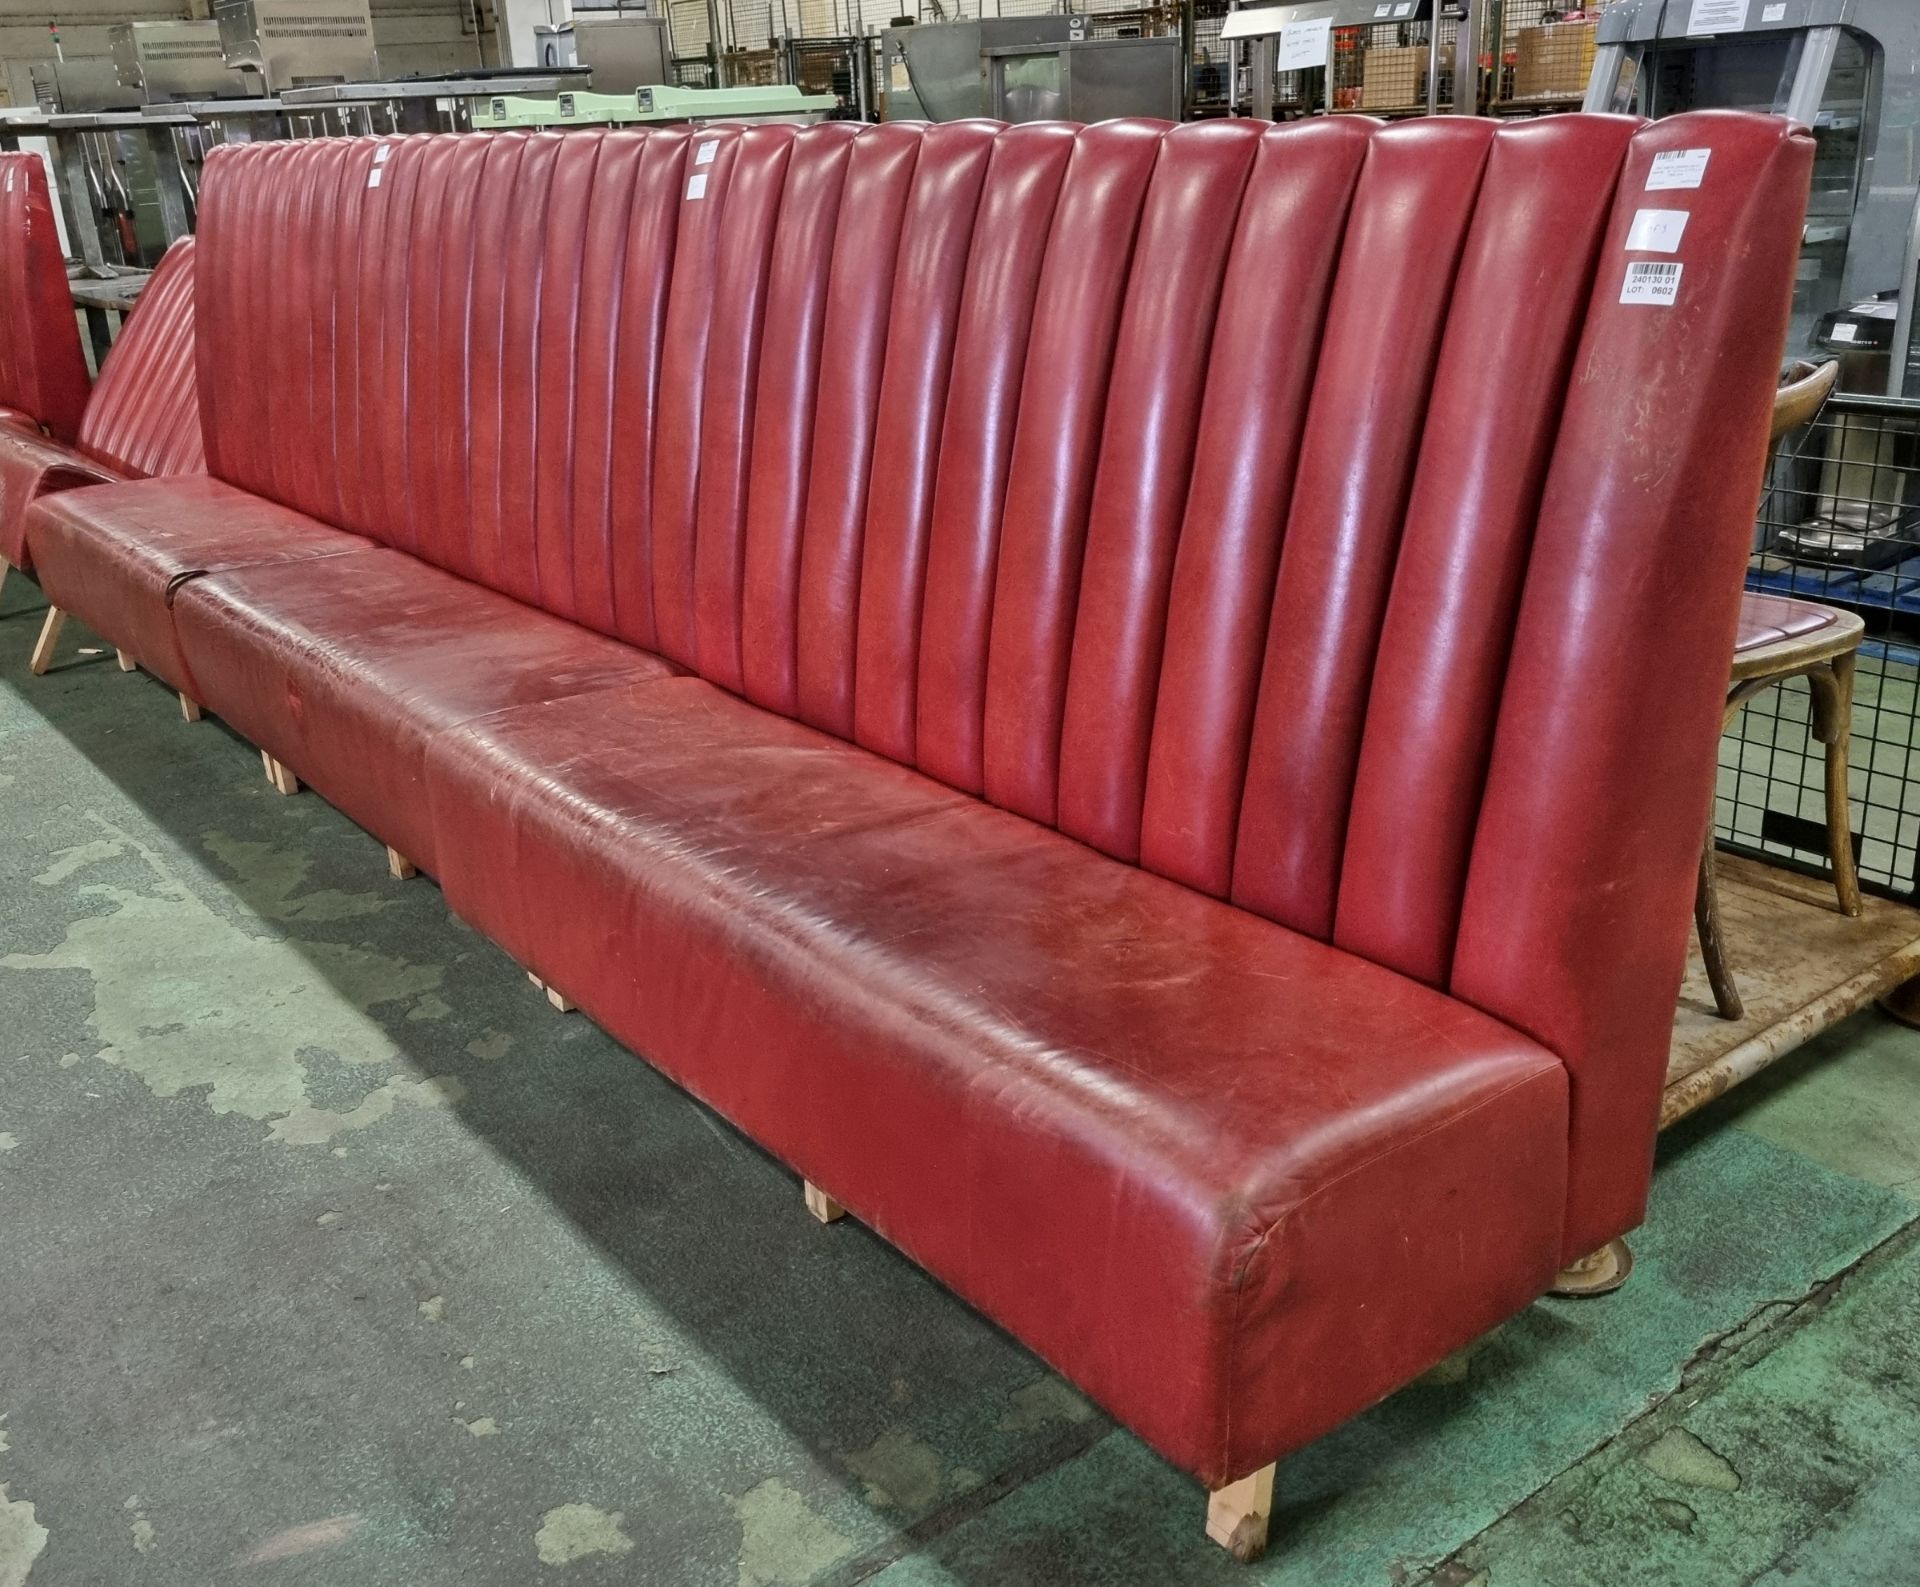 Red leather padded bench seating - Image 2 of 5